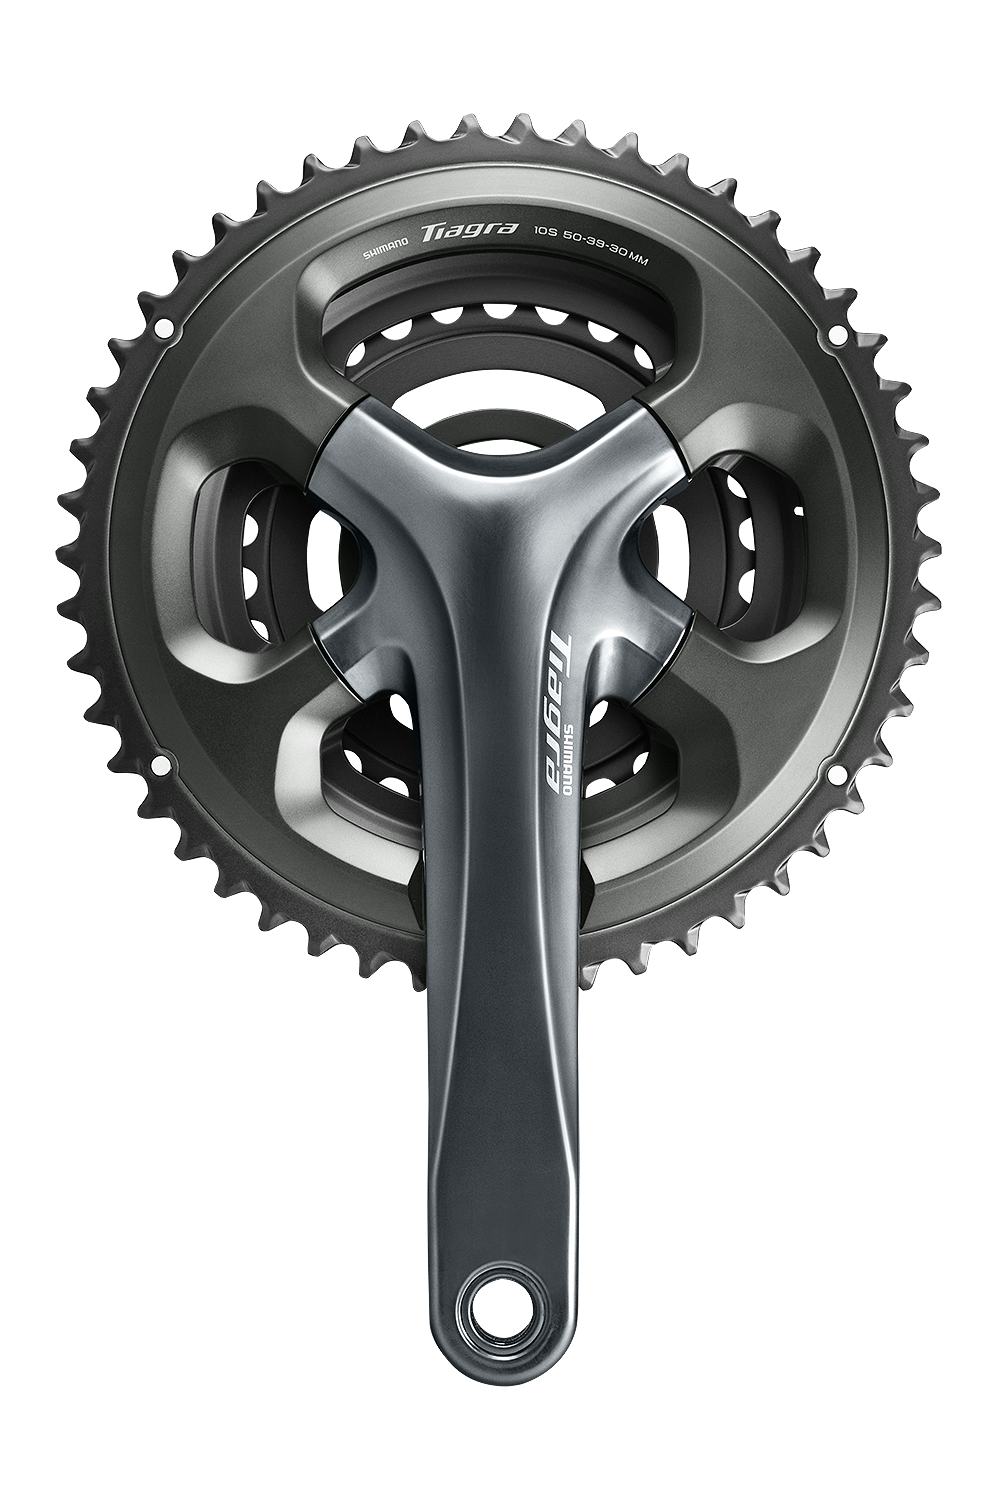 The new 4-arm Tiagra crank is available in double and triple versions.